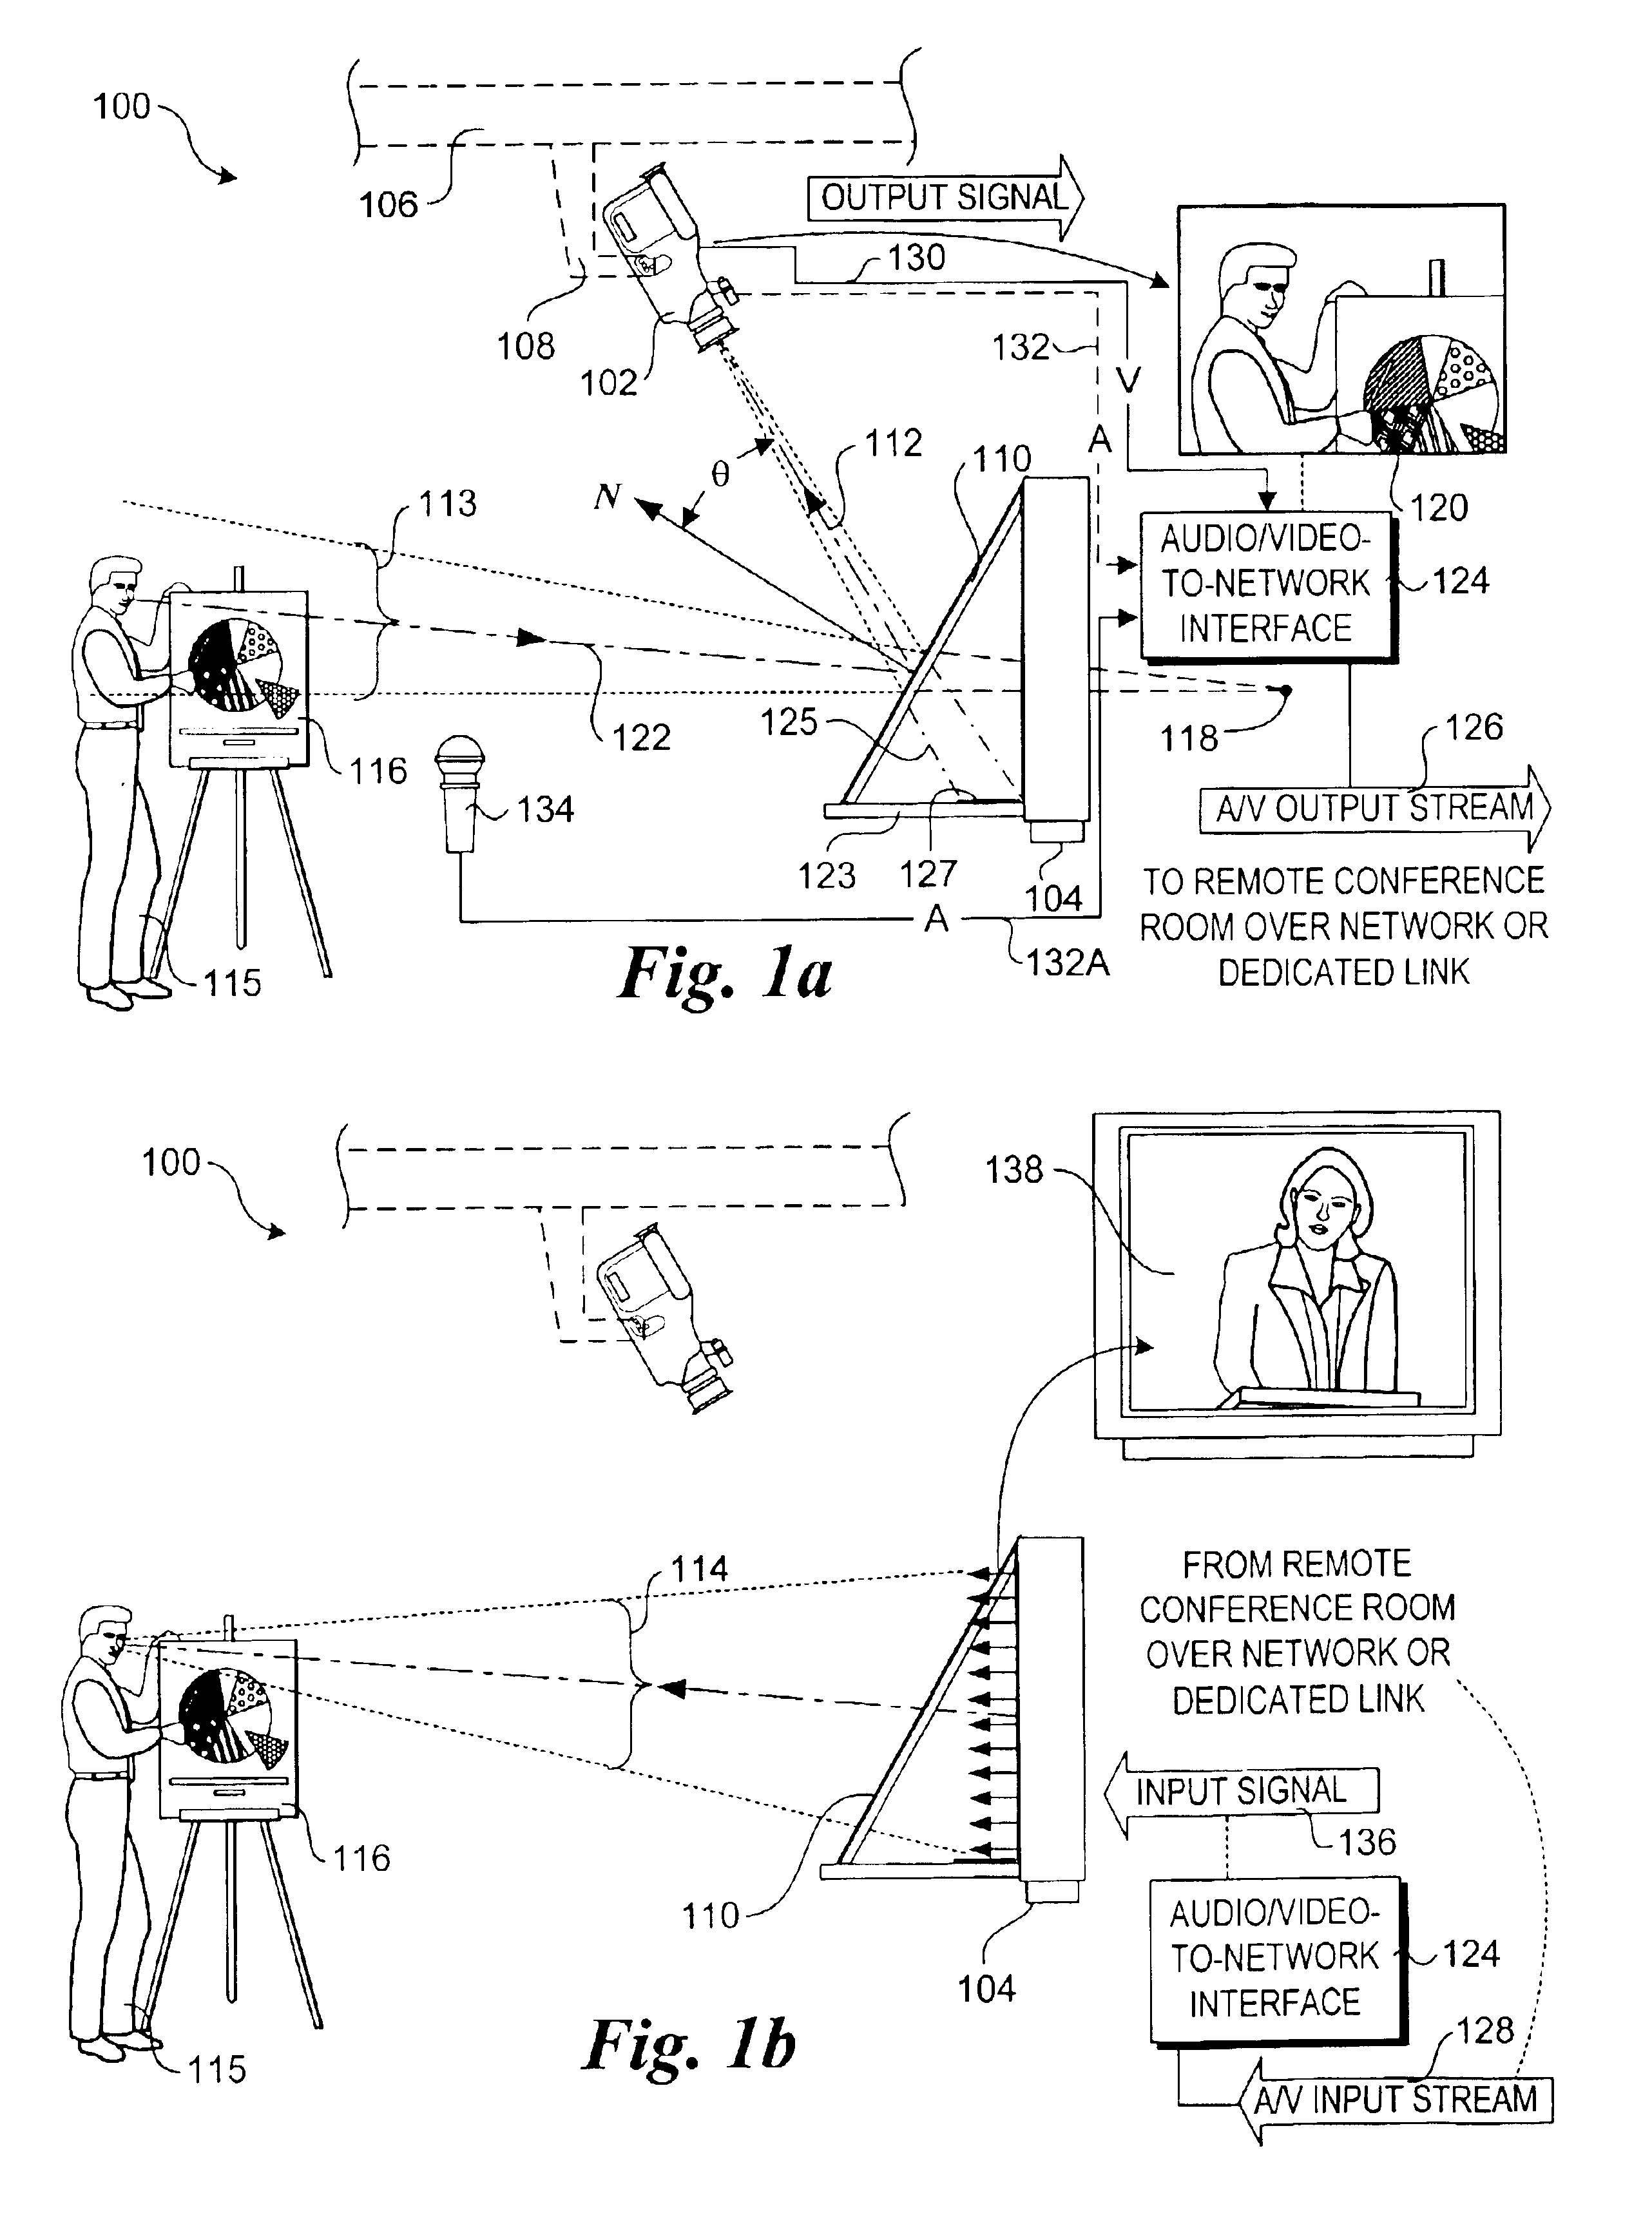 Apparatus, system and method for enabling eye-to-eye contact in video conferences